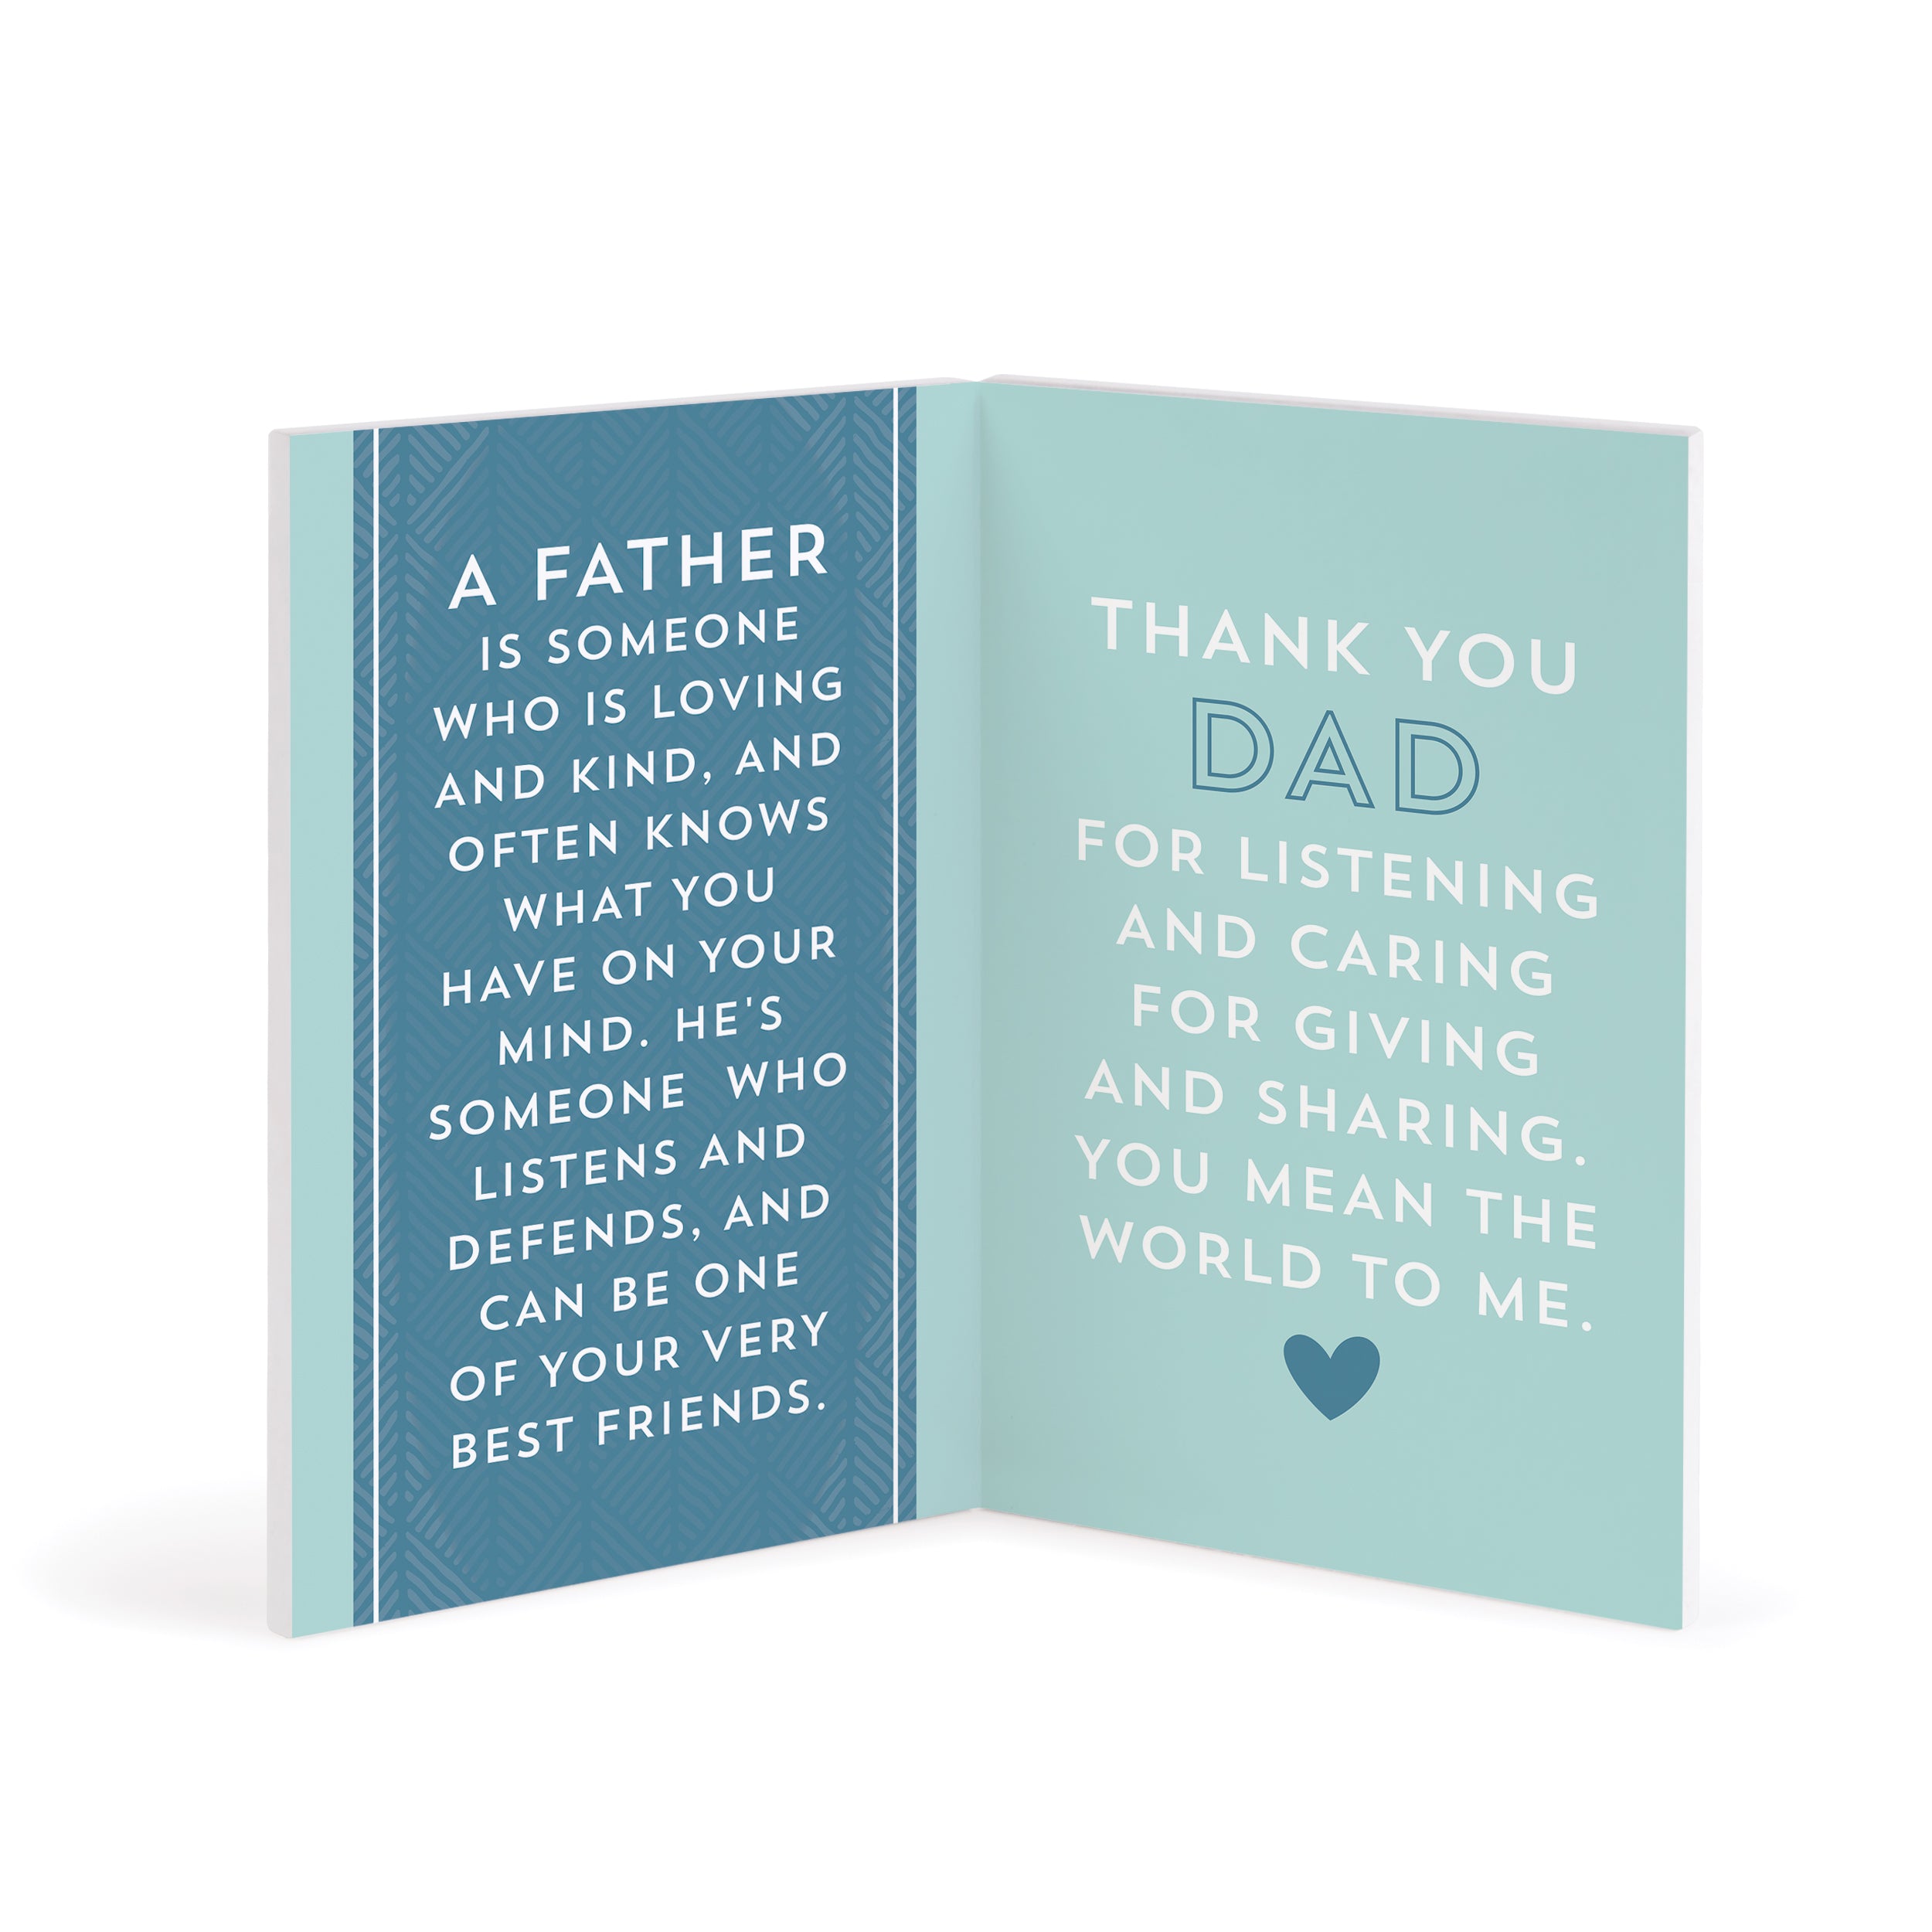 I Love That You're My Dad Wooden Keepsake Card